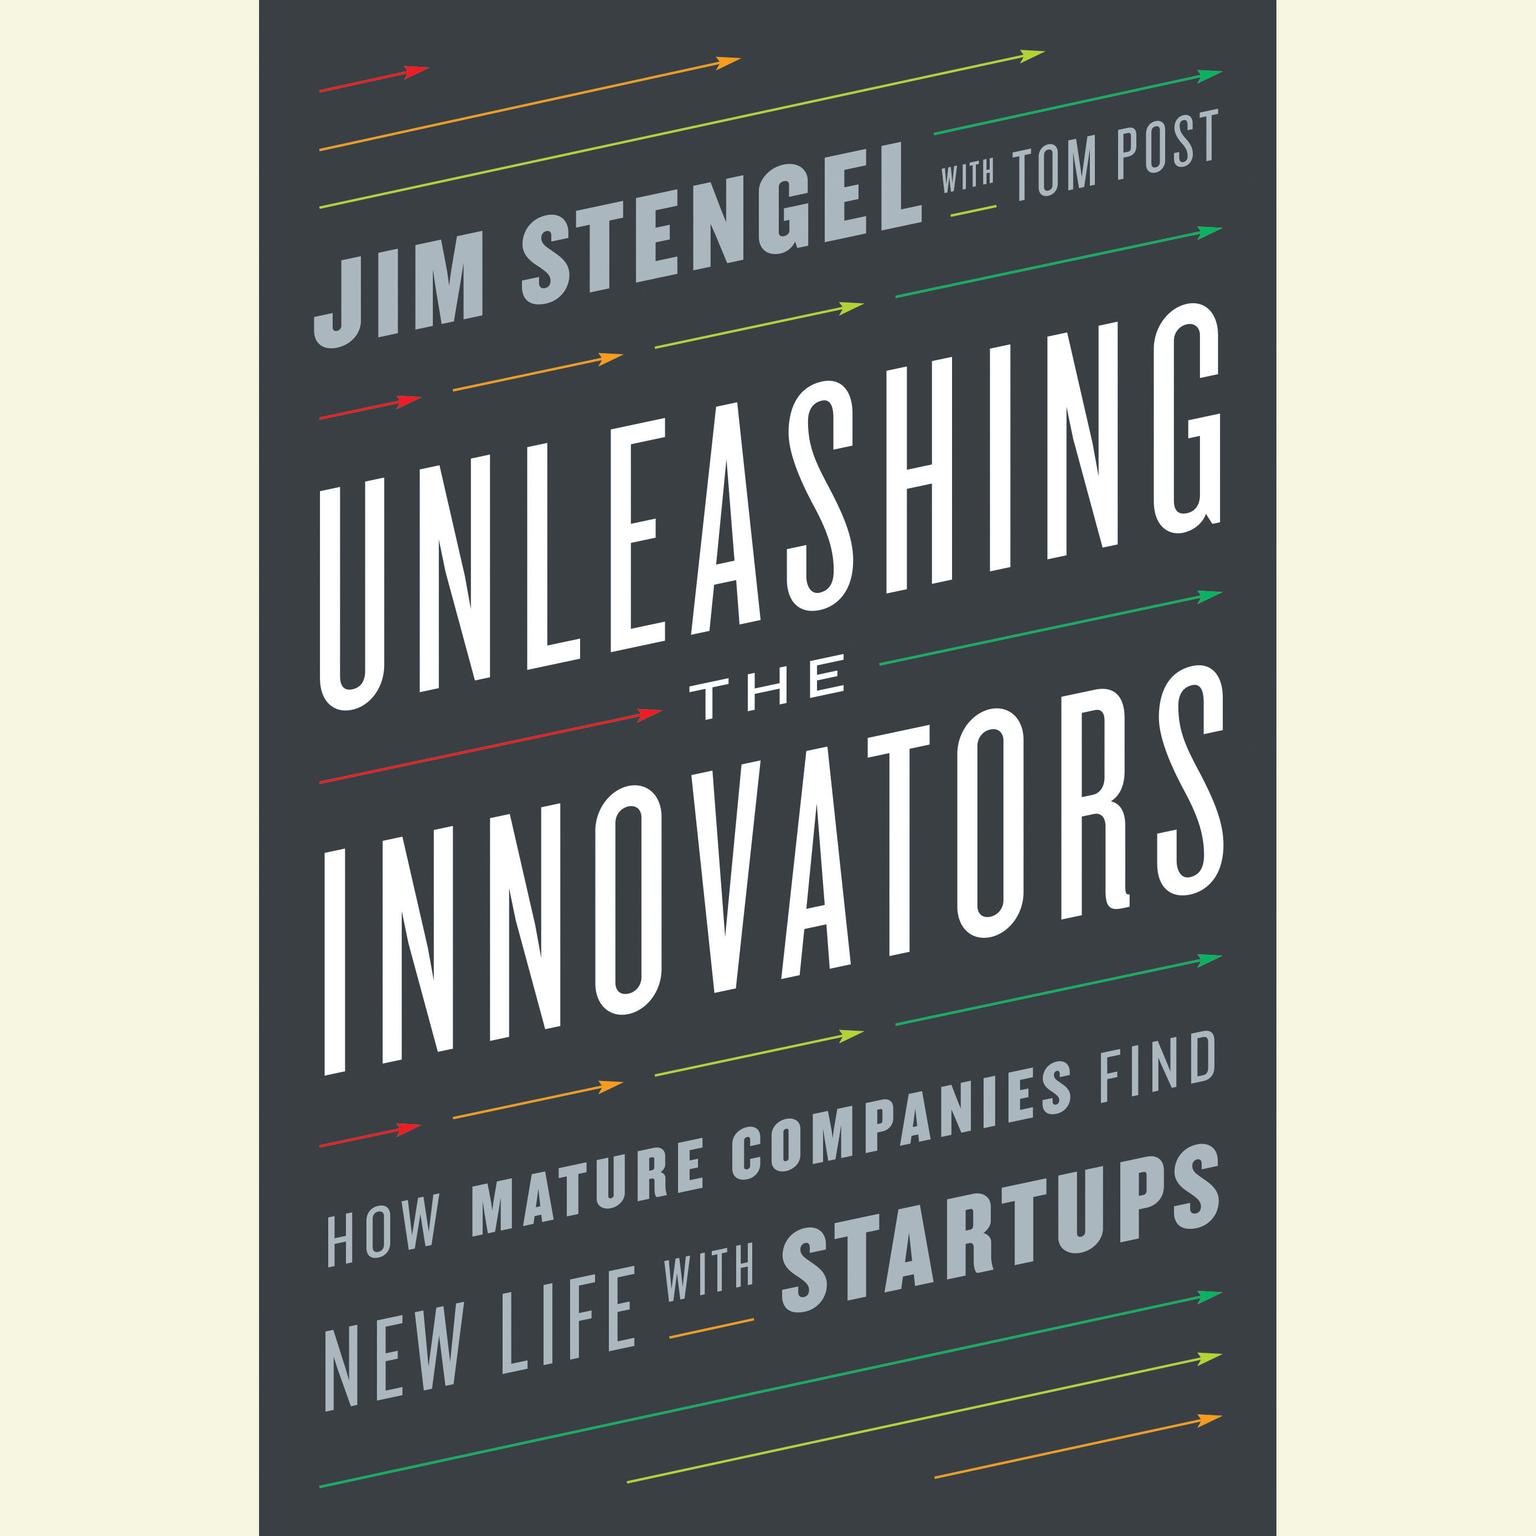 Unleashing the Innovators: How Mature Companies Find New Life with Startups Audiobook, by Jim Stengel